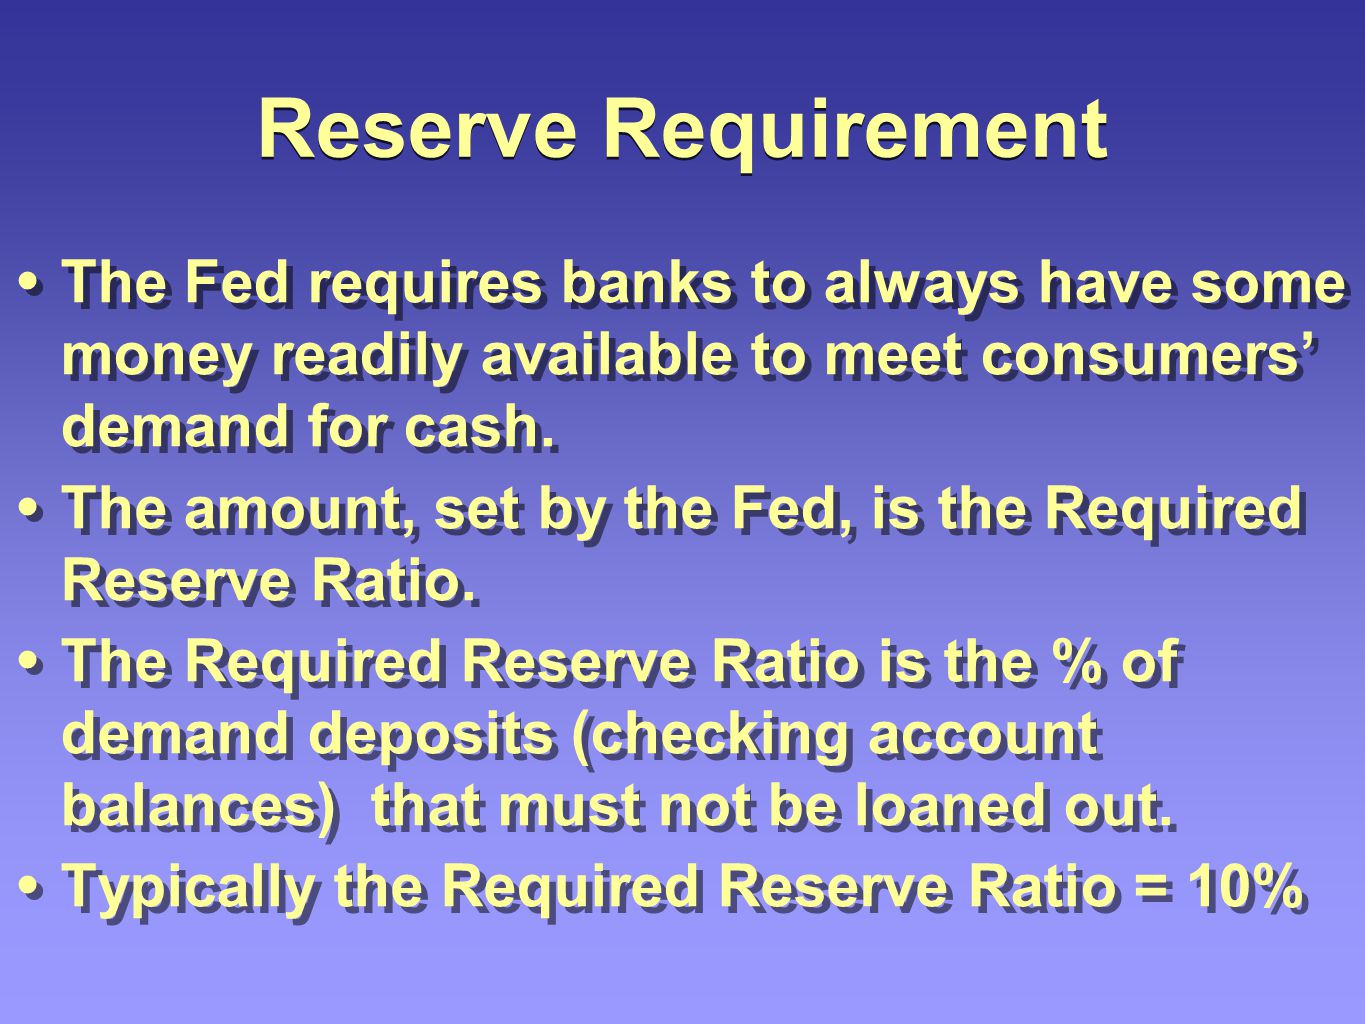 Reserve Requirement The Fed requires banks to always have some money readily available to meet consumers’ demand for cash.